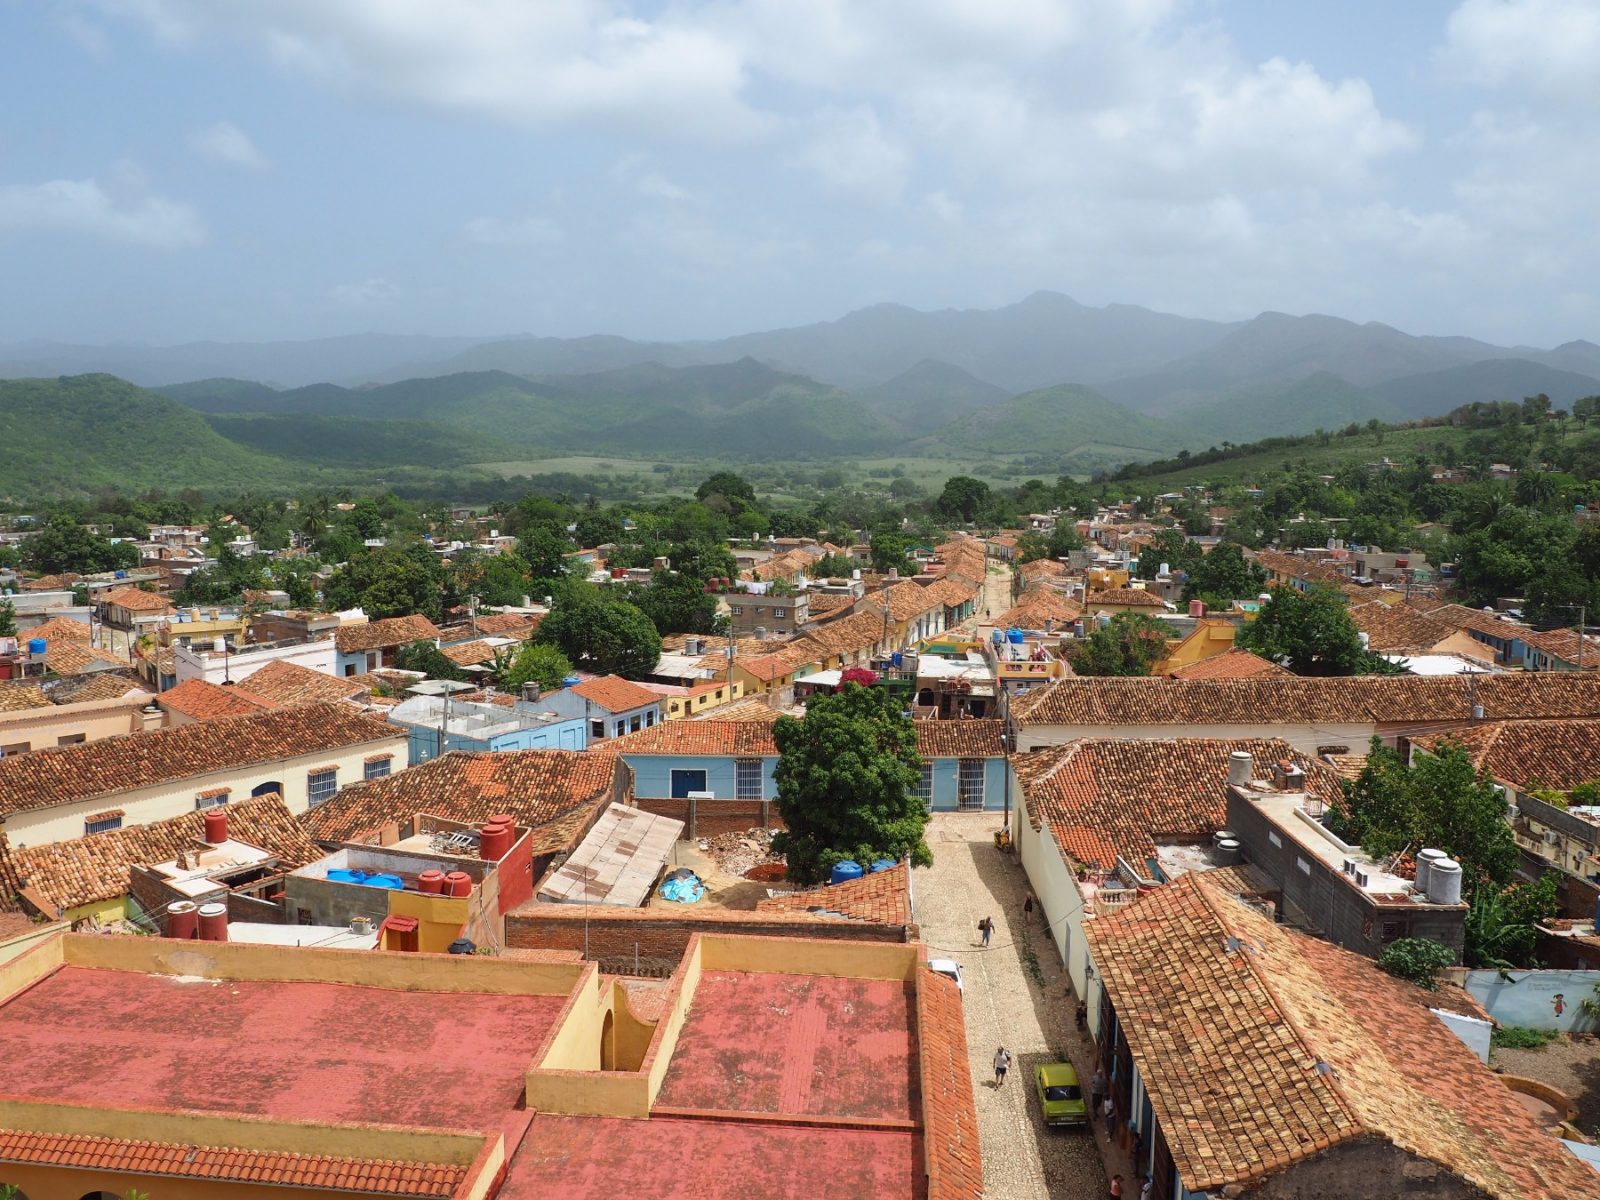 VIEW OVER THE CITY OF TRINIDAD